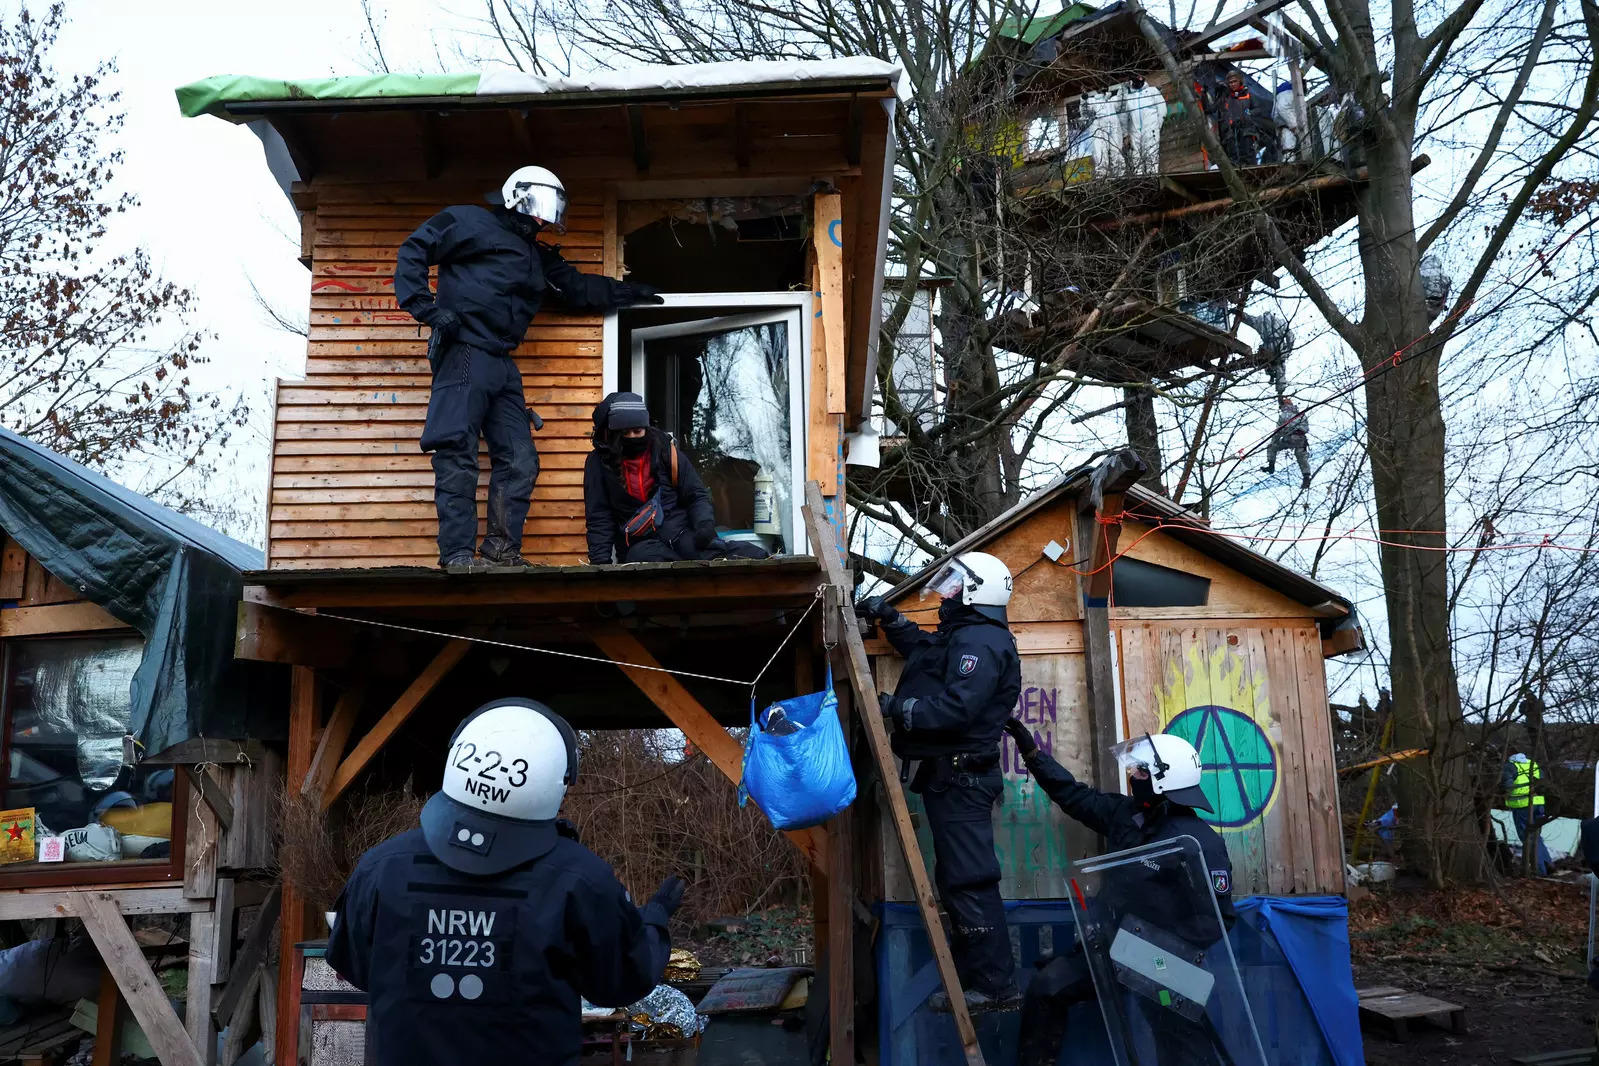 In Pictures: Police move on coal mine protesters barricaded in abandoned German village